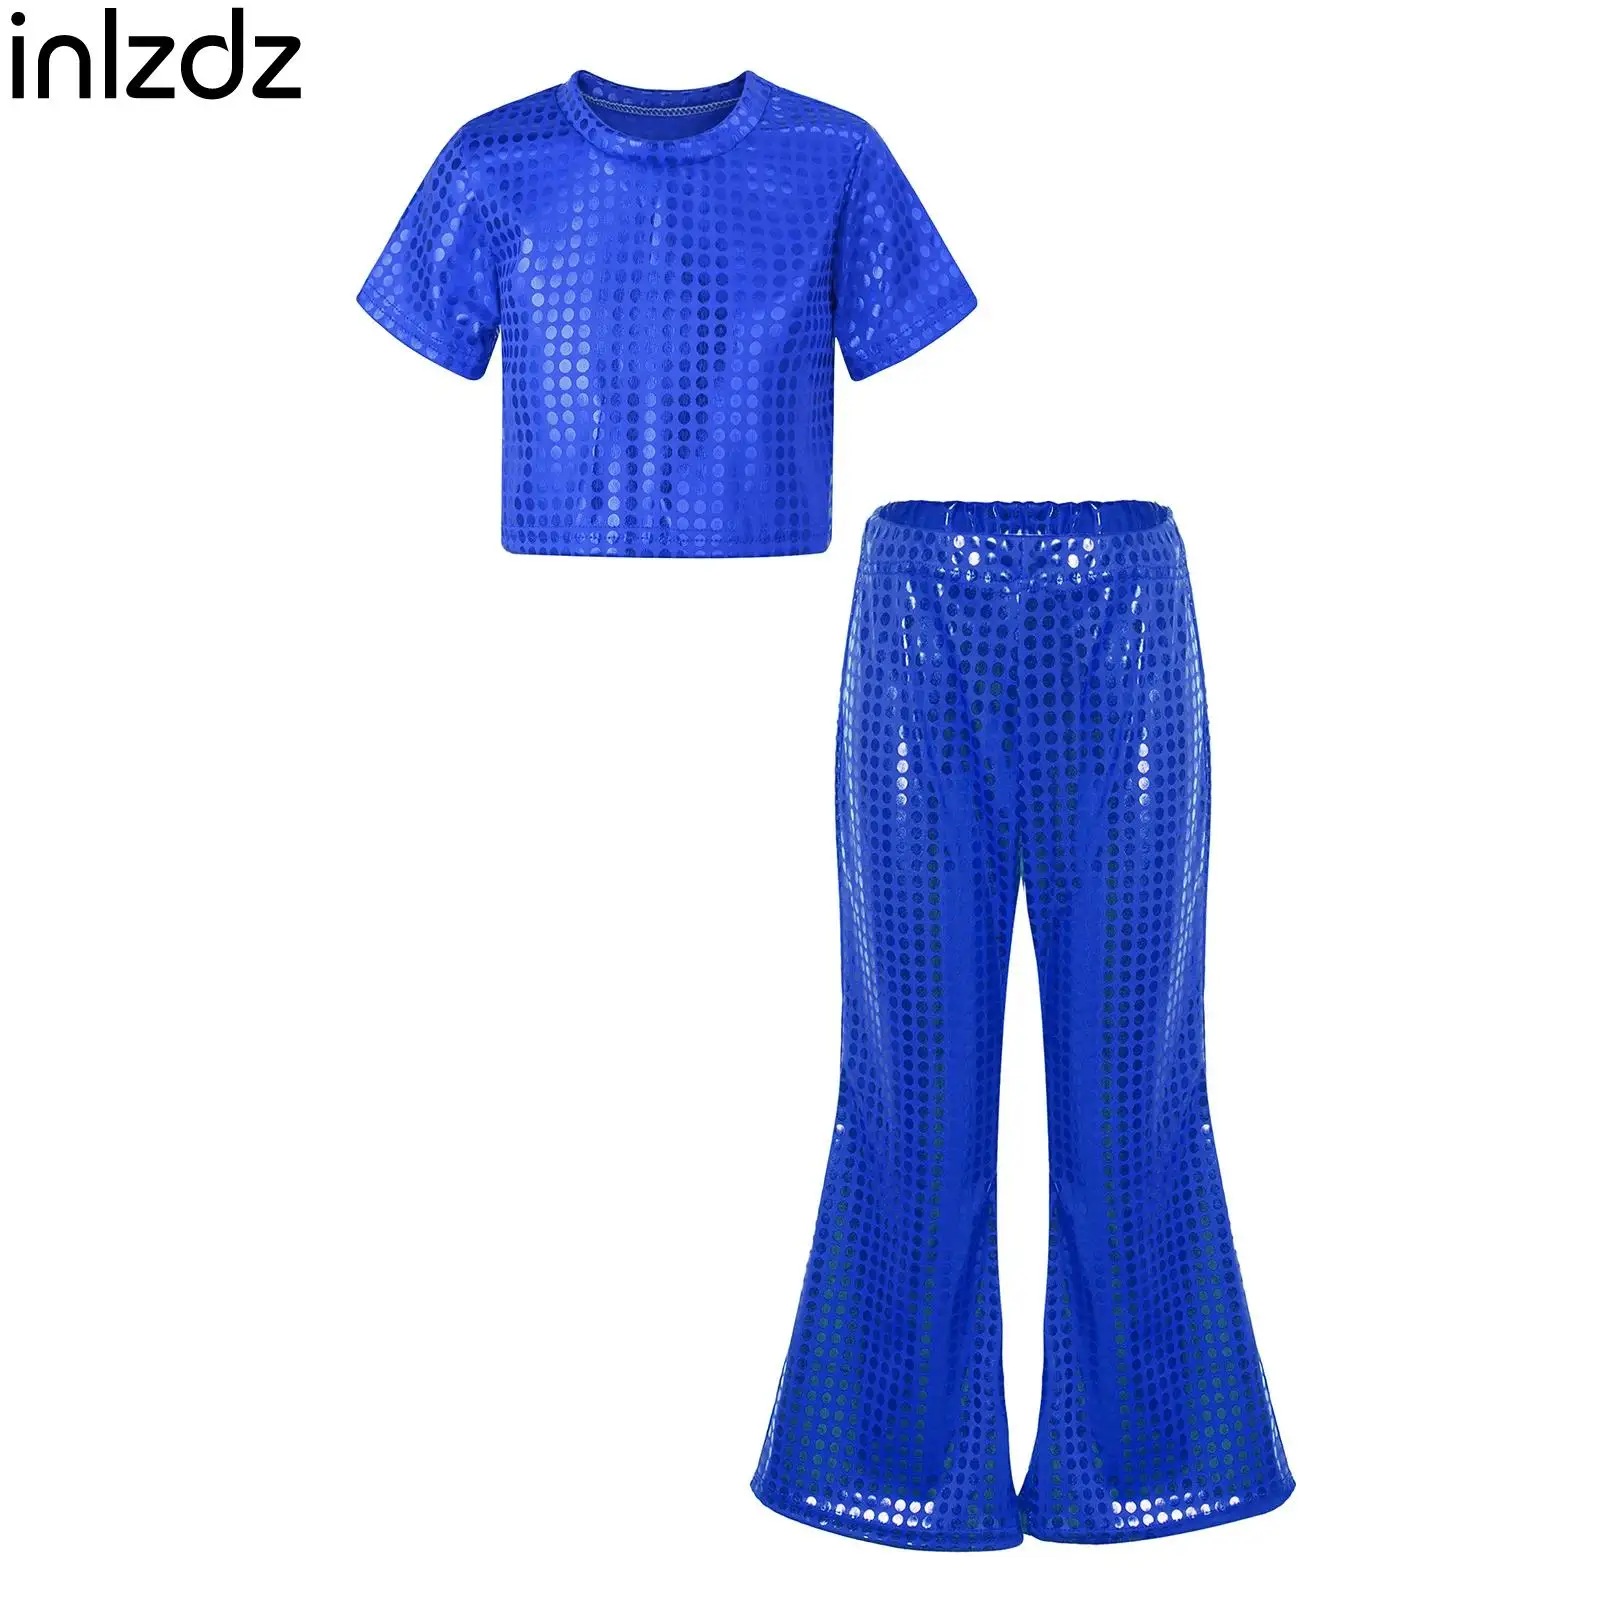 

Kids Girls High Quality Dance Set Short Sleeve Shiny Dot Sequins Crop Top with Elastic Waist Flared Pants for School Performance